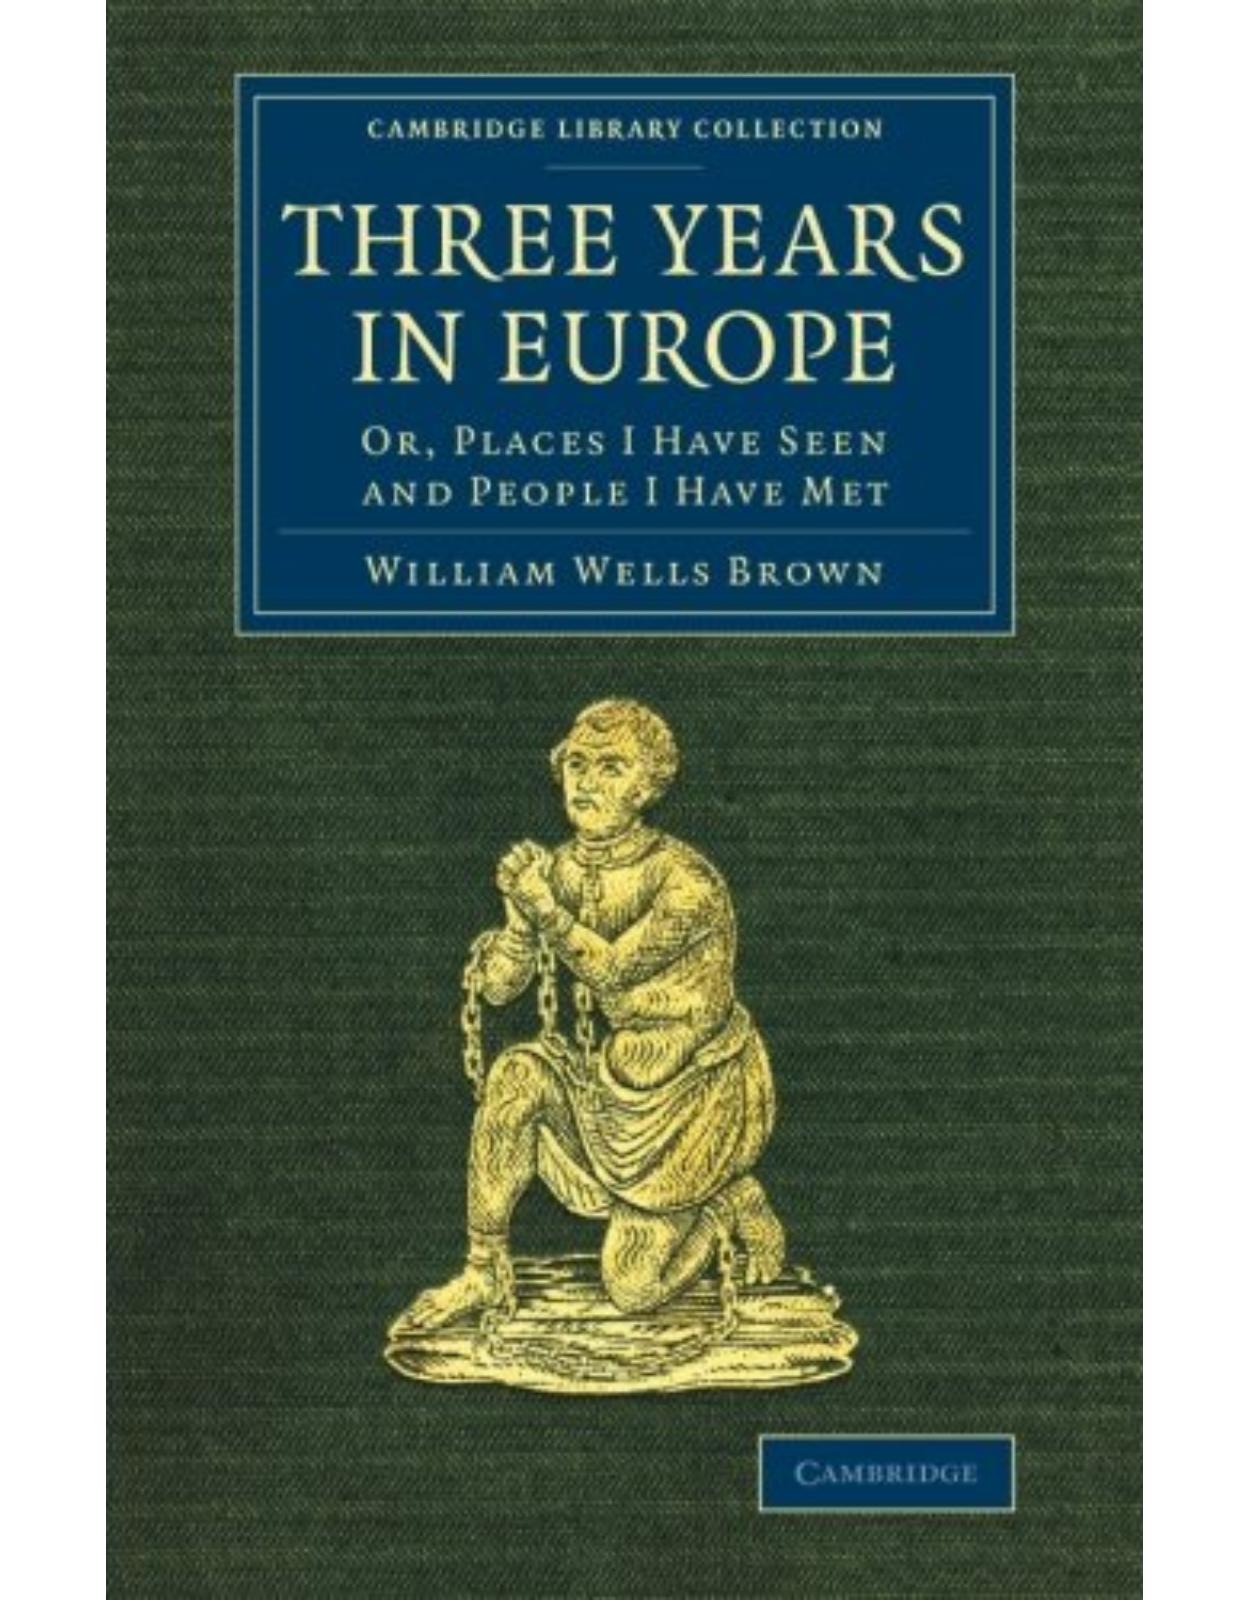 Three Years in Europe: Or, Places I Have Seen and People I Have Met (Cambridge Library Collection - Slavery and Abolition)